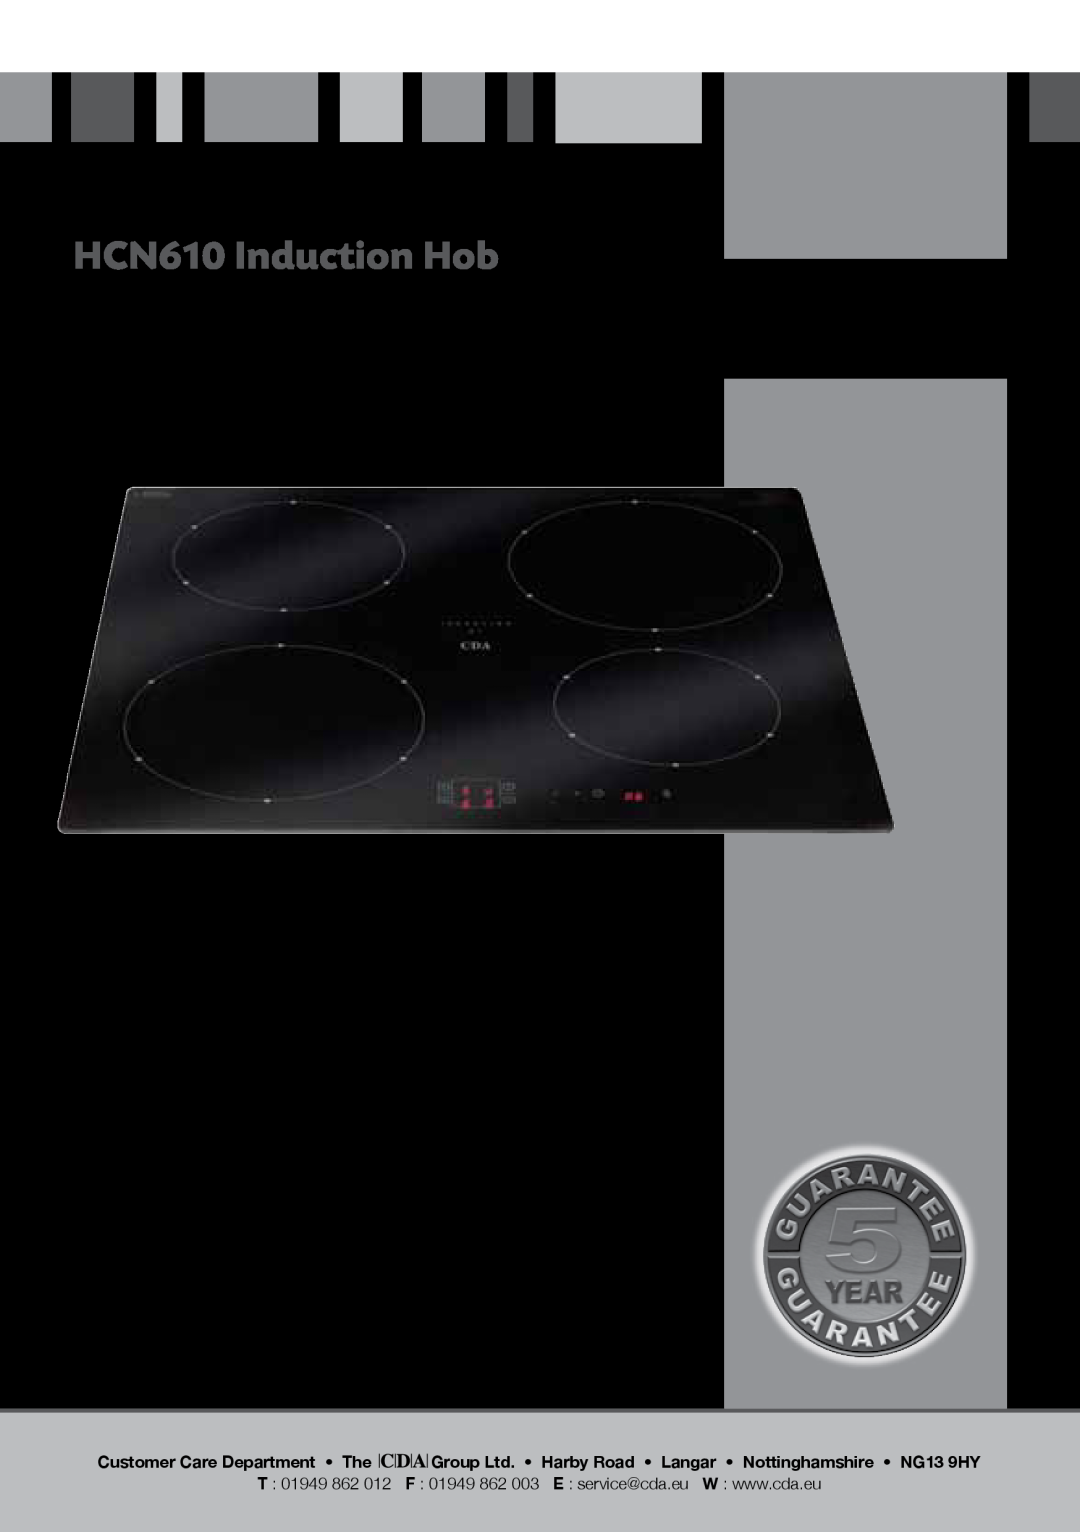 CDA manual HCN610 Induction Hob, Manual for Installation, Use and Maintenance, Customer Care Department The 